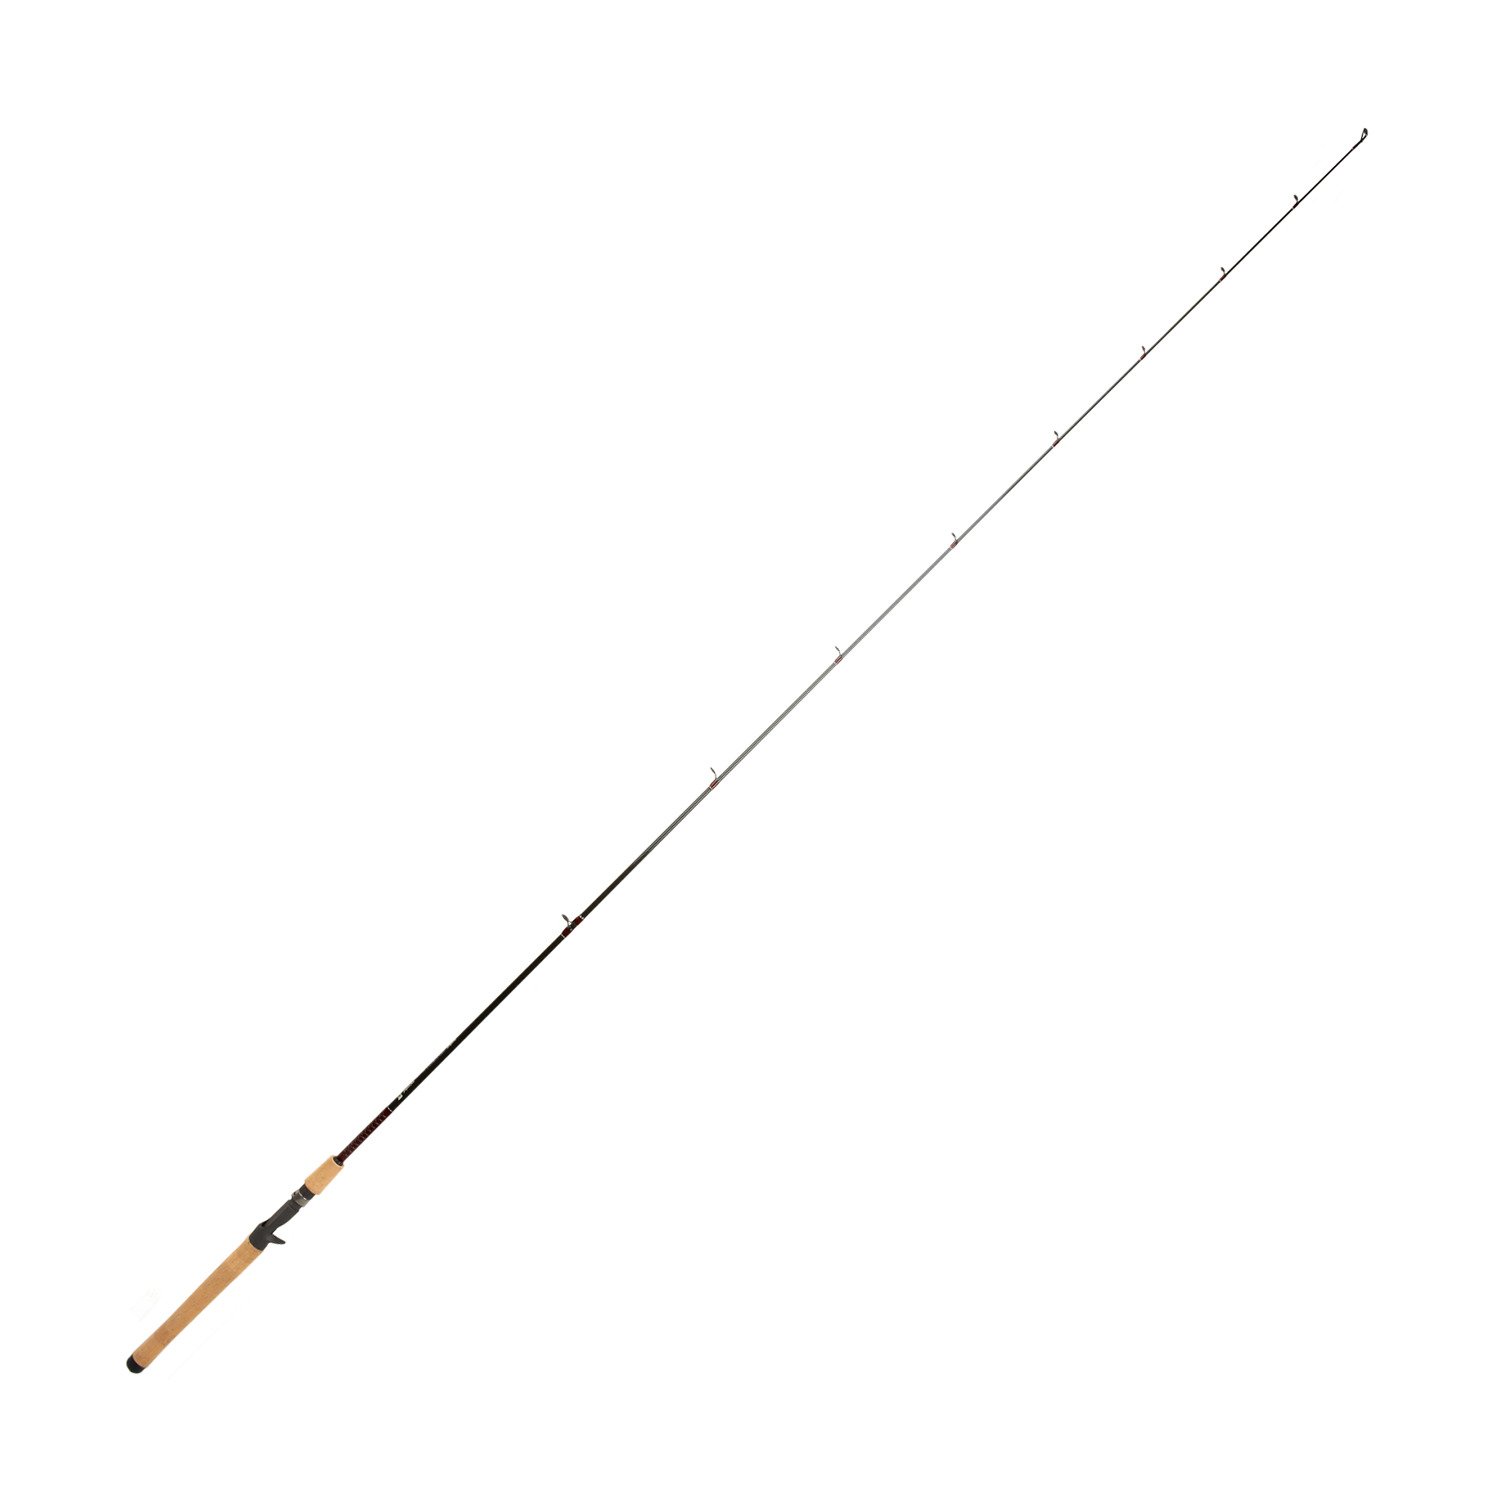 All Star Rods® Classic Graphite Series 7'6 Saltwater Coastal